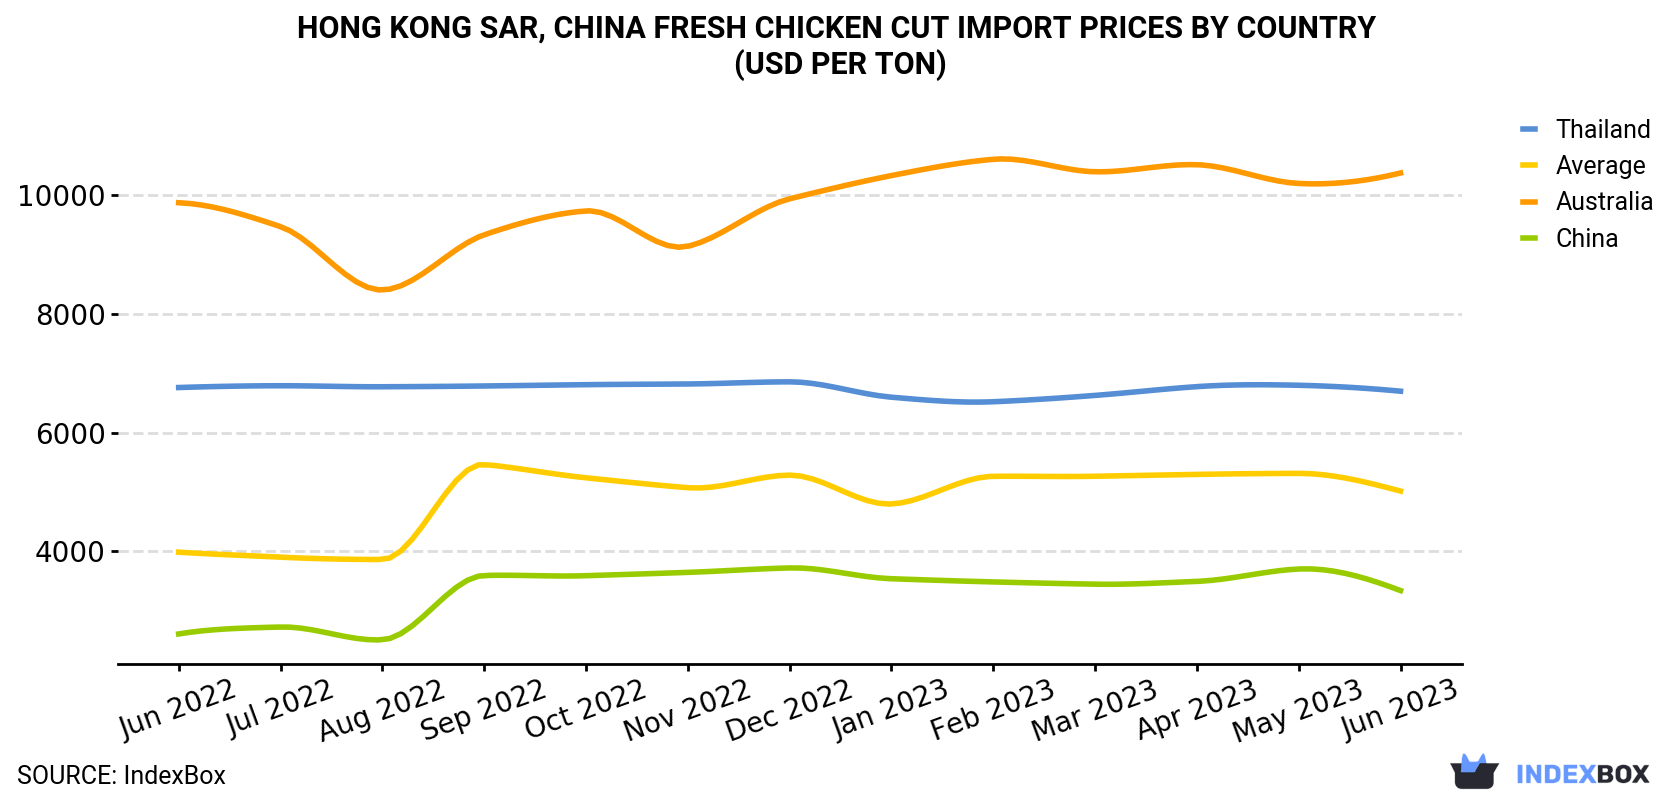 Hong Kong Fresh Chicken Cut Import Prices By Country (USD Per Ton)